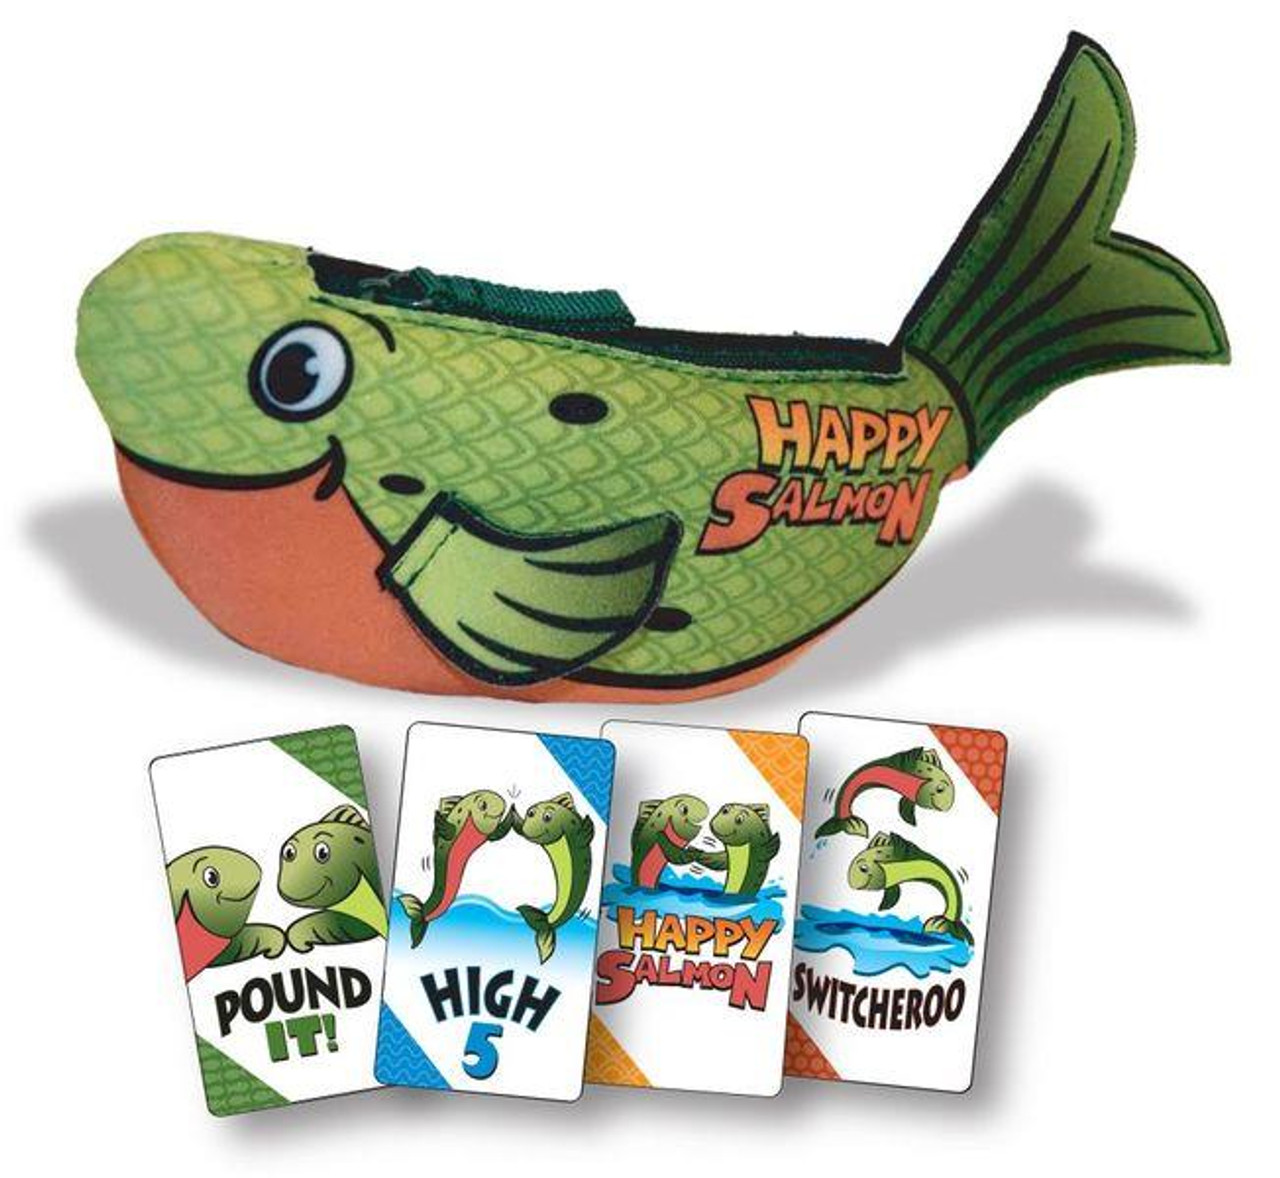 https://cdn11.bigcommerce.com/s-0xqgn36m/images/stencil/1280x1280/products/558/3442/Happy-Salmon-Card-Game-892884000906_image1__32752.1701987584.jpg?c=2